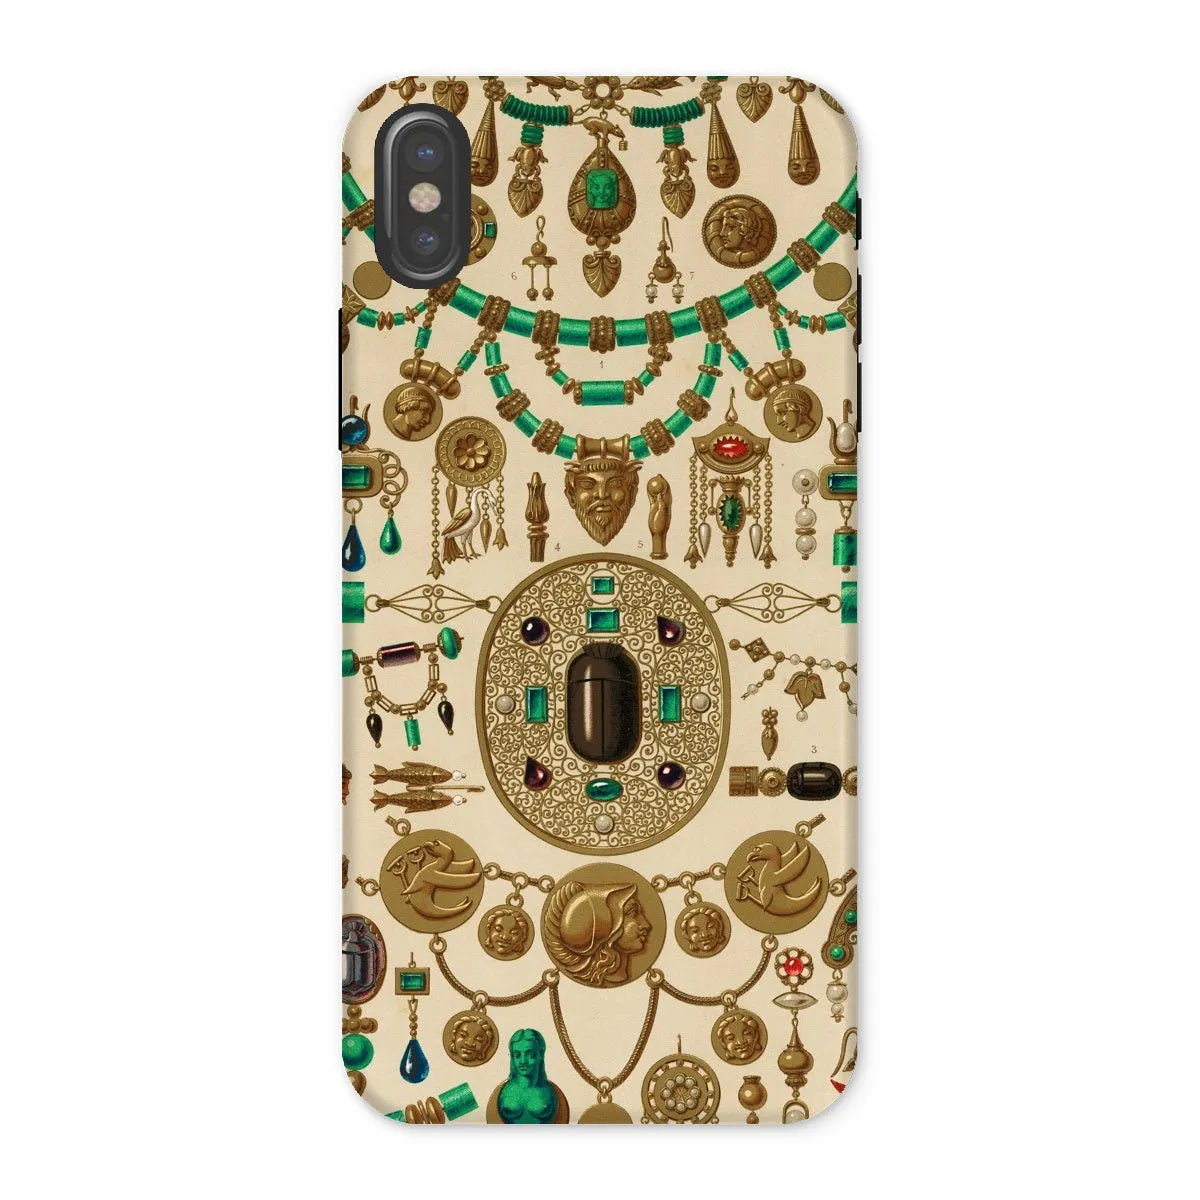 Etruscan Jewelry By Auguste Racinet Art Phone Case - Iphone x / Matte - Mobile Phone Cases - Aesthetic Art